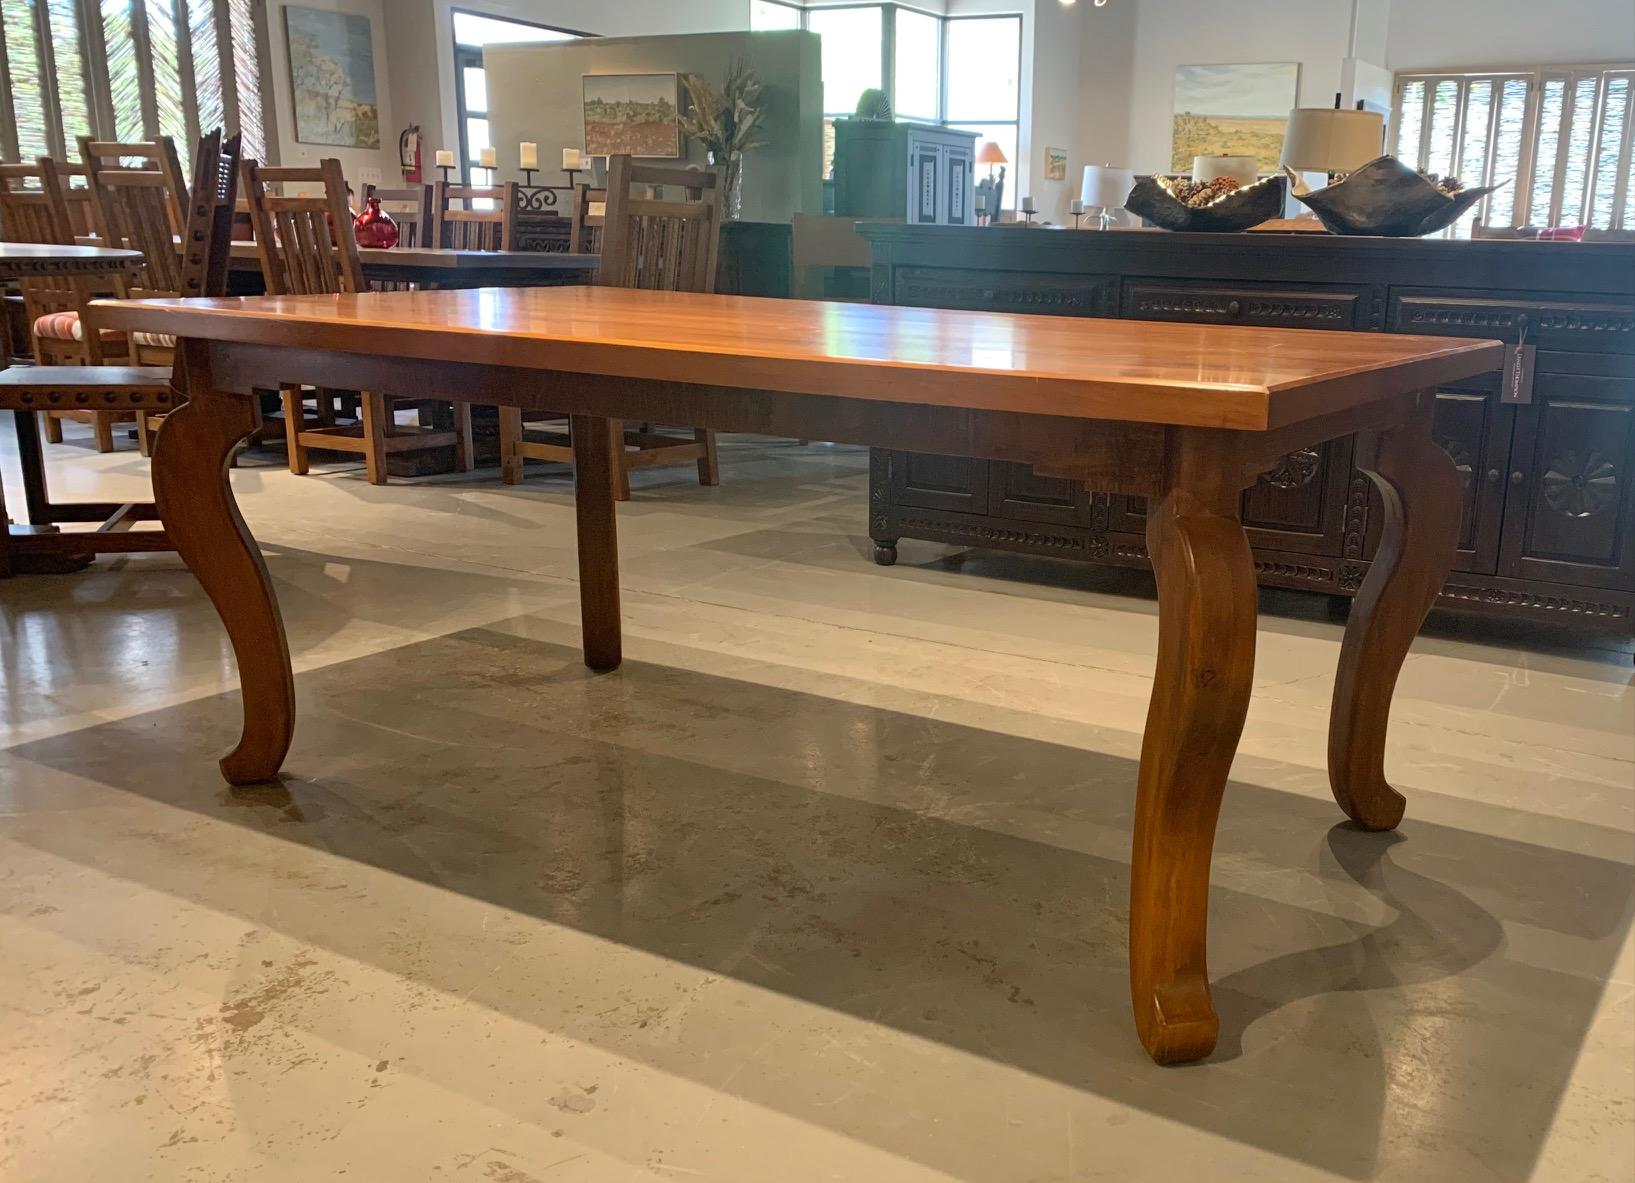 Beautiful Ernest Thompson Sandia Dining Table. 
Hand carved legs with a custom finish.

This is a showroom table so does show some use.
